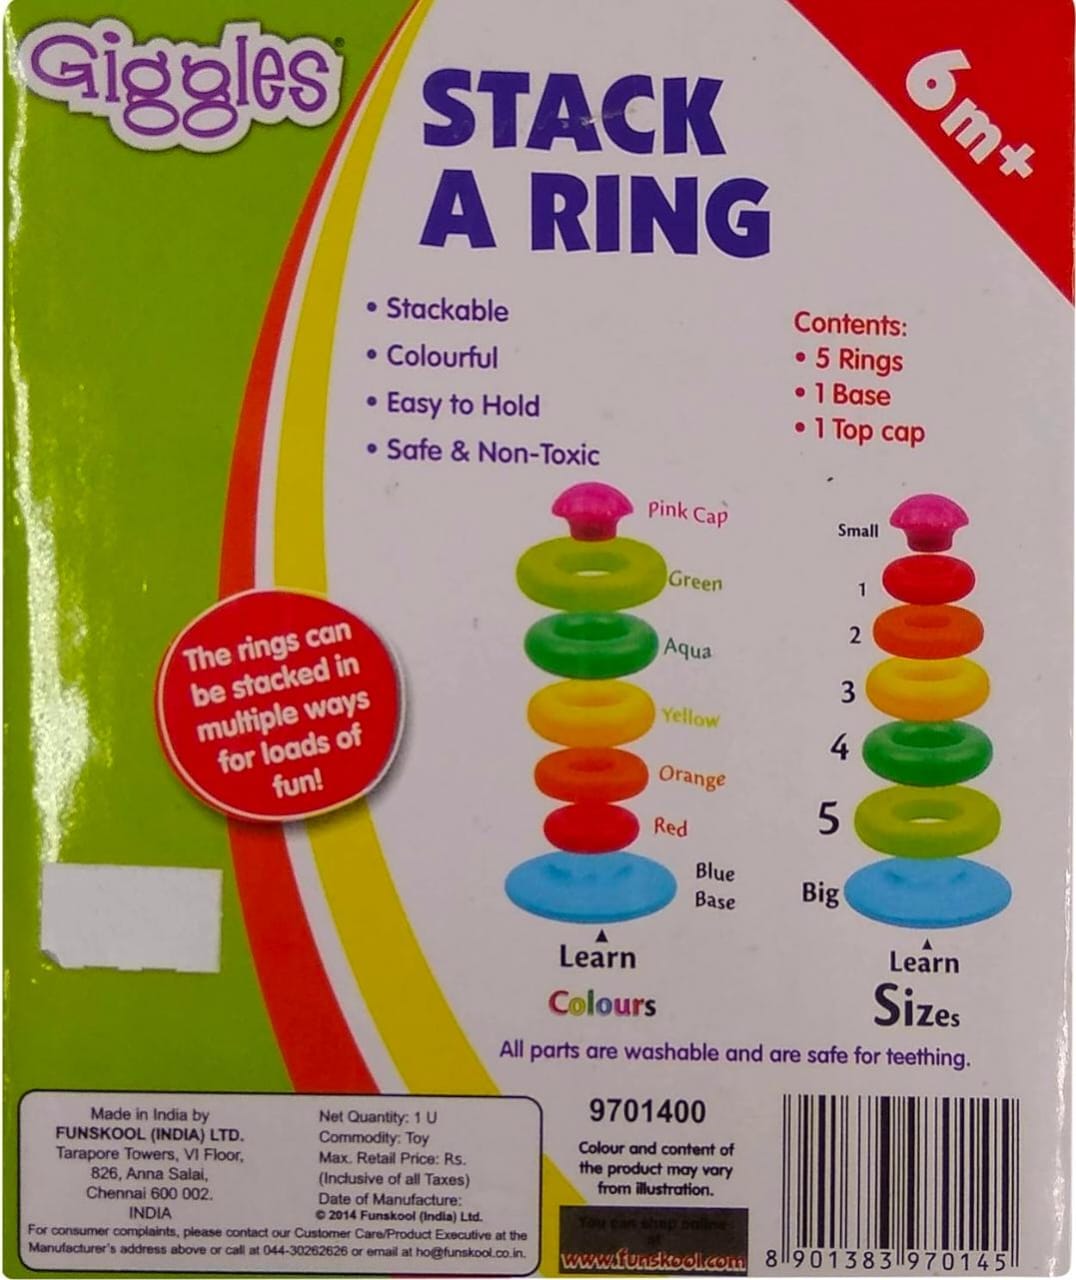 Giggles Stack A Ring - Multicolour Carton for 6+ months by Funskool